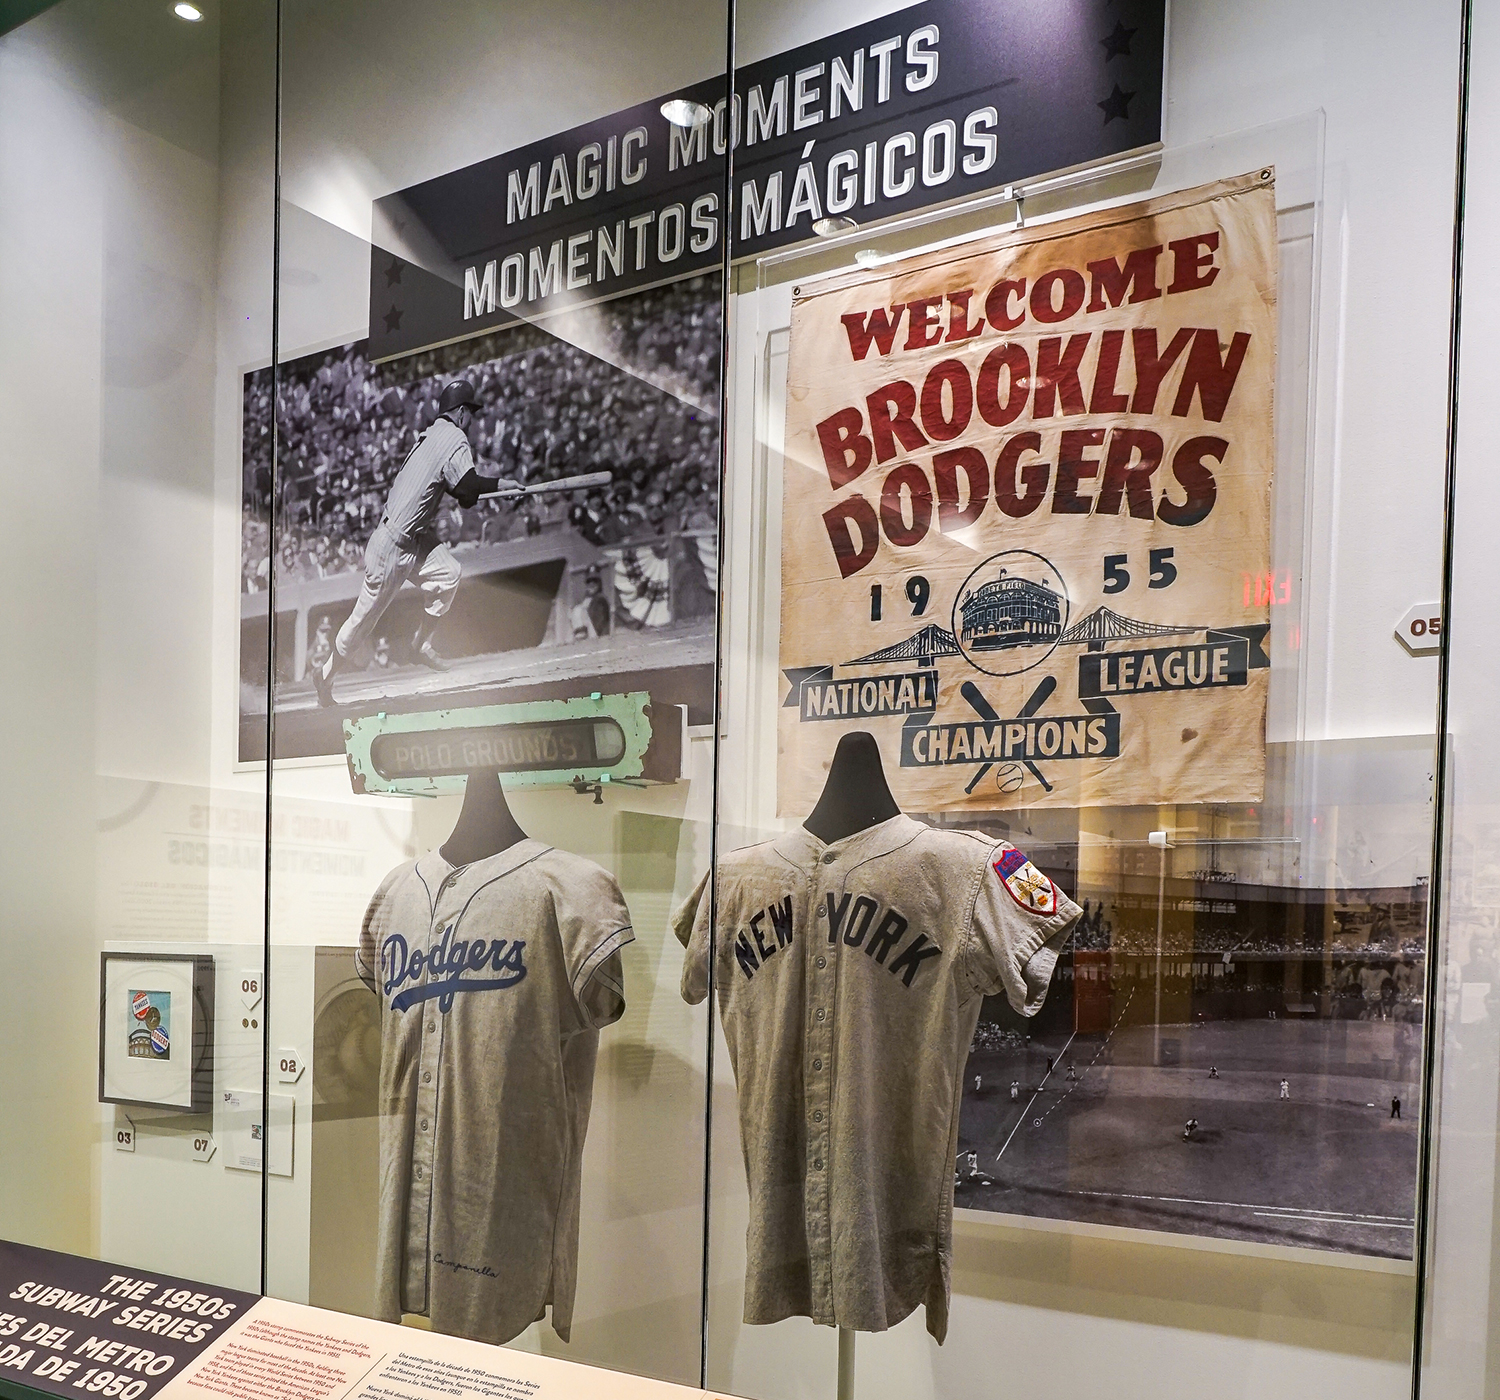 Polo Grounds subway train sign, 1940s; Brooklyn Dodgers National League Champions canvas banner, 1955; Roy Campanella Brooklyn Dodgers road jersey, 1955; and the Yogi Berra New York Yankees road jersey, 1951